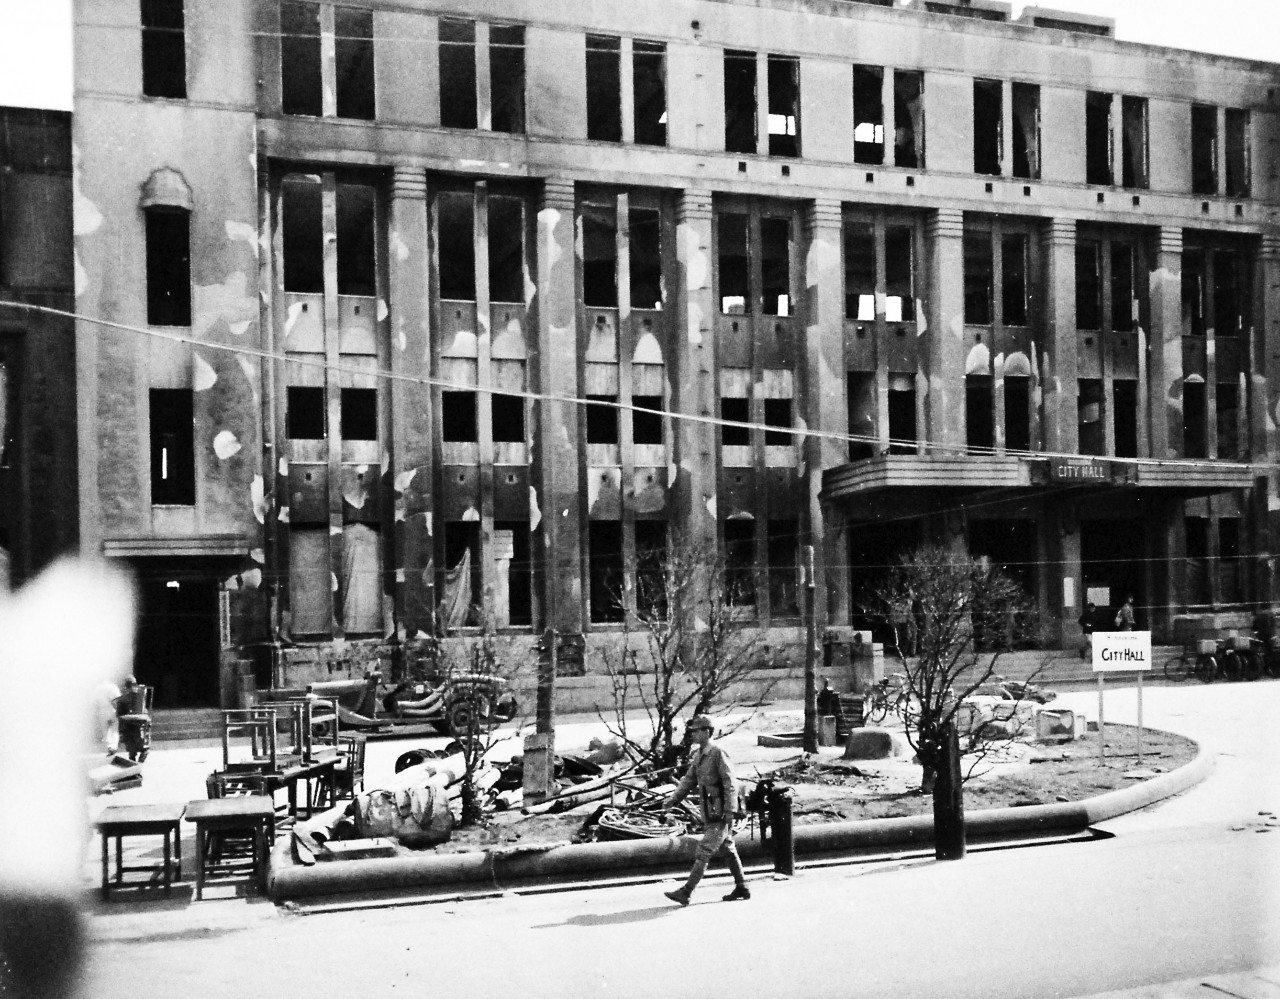 80-G-354618: Hiroshima, Japan, 1945.   Atomic Bomb Damage to Hiroshima, as seen by USS Appalachian (AGC-1).   The City Hall.   Photographed by PhoM3/C George Almarez.  Photographed received October 26, 1945.     U.S. Navy photograph, now in the collections of the National Archives.  (2016/06/21).